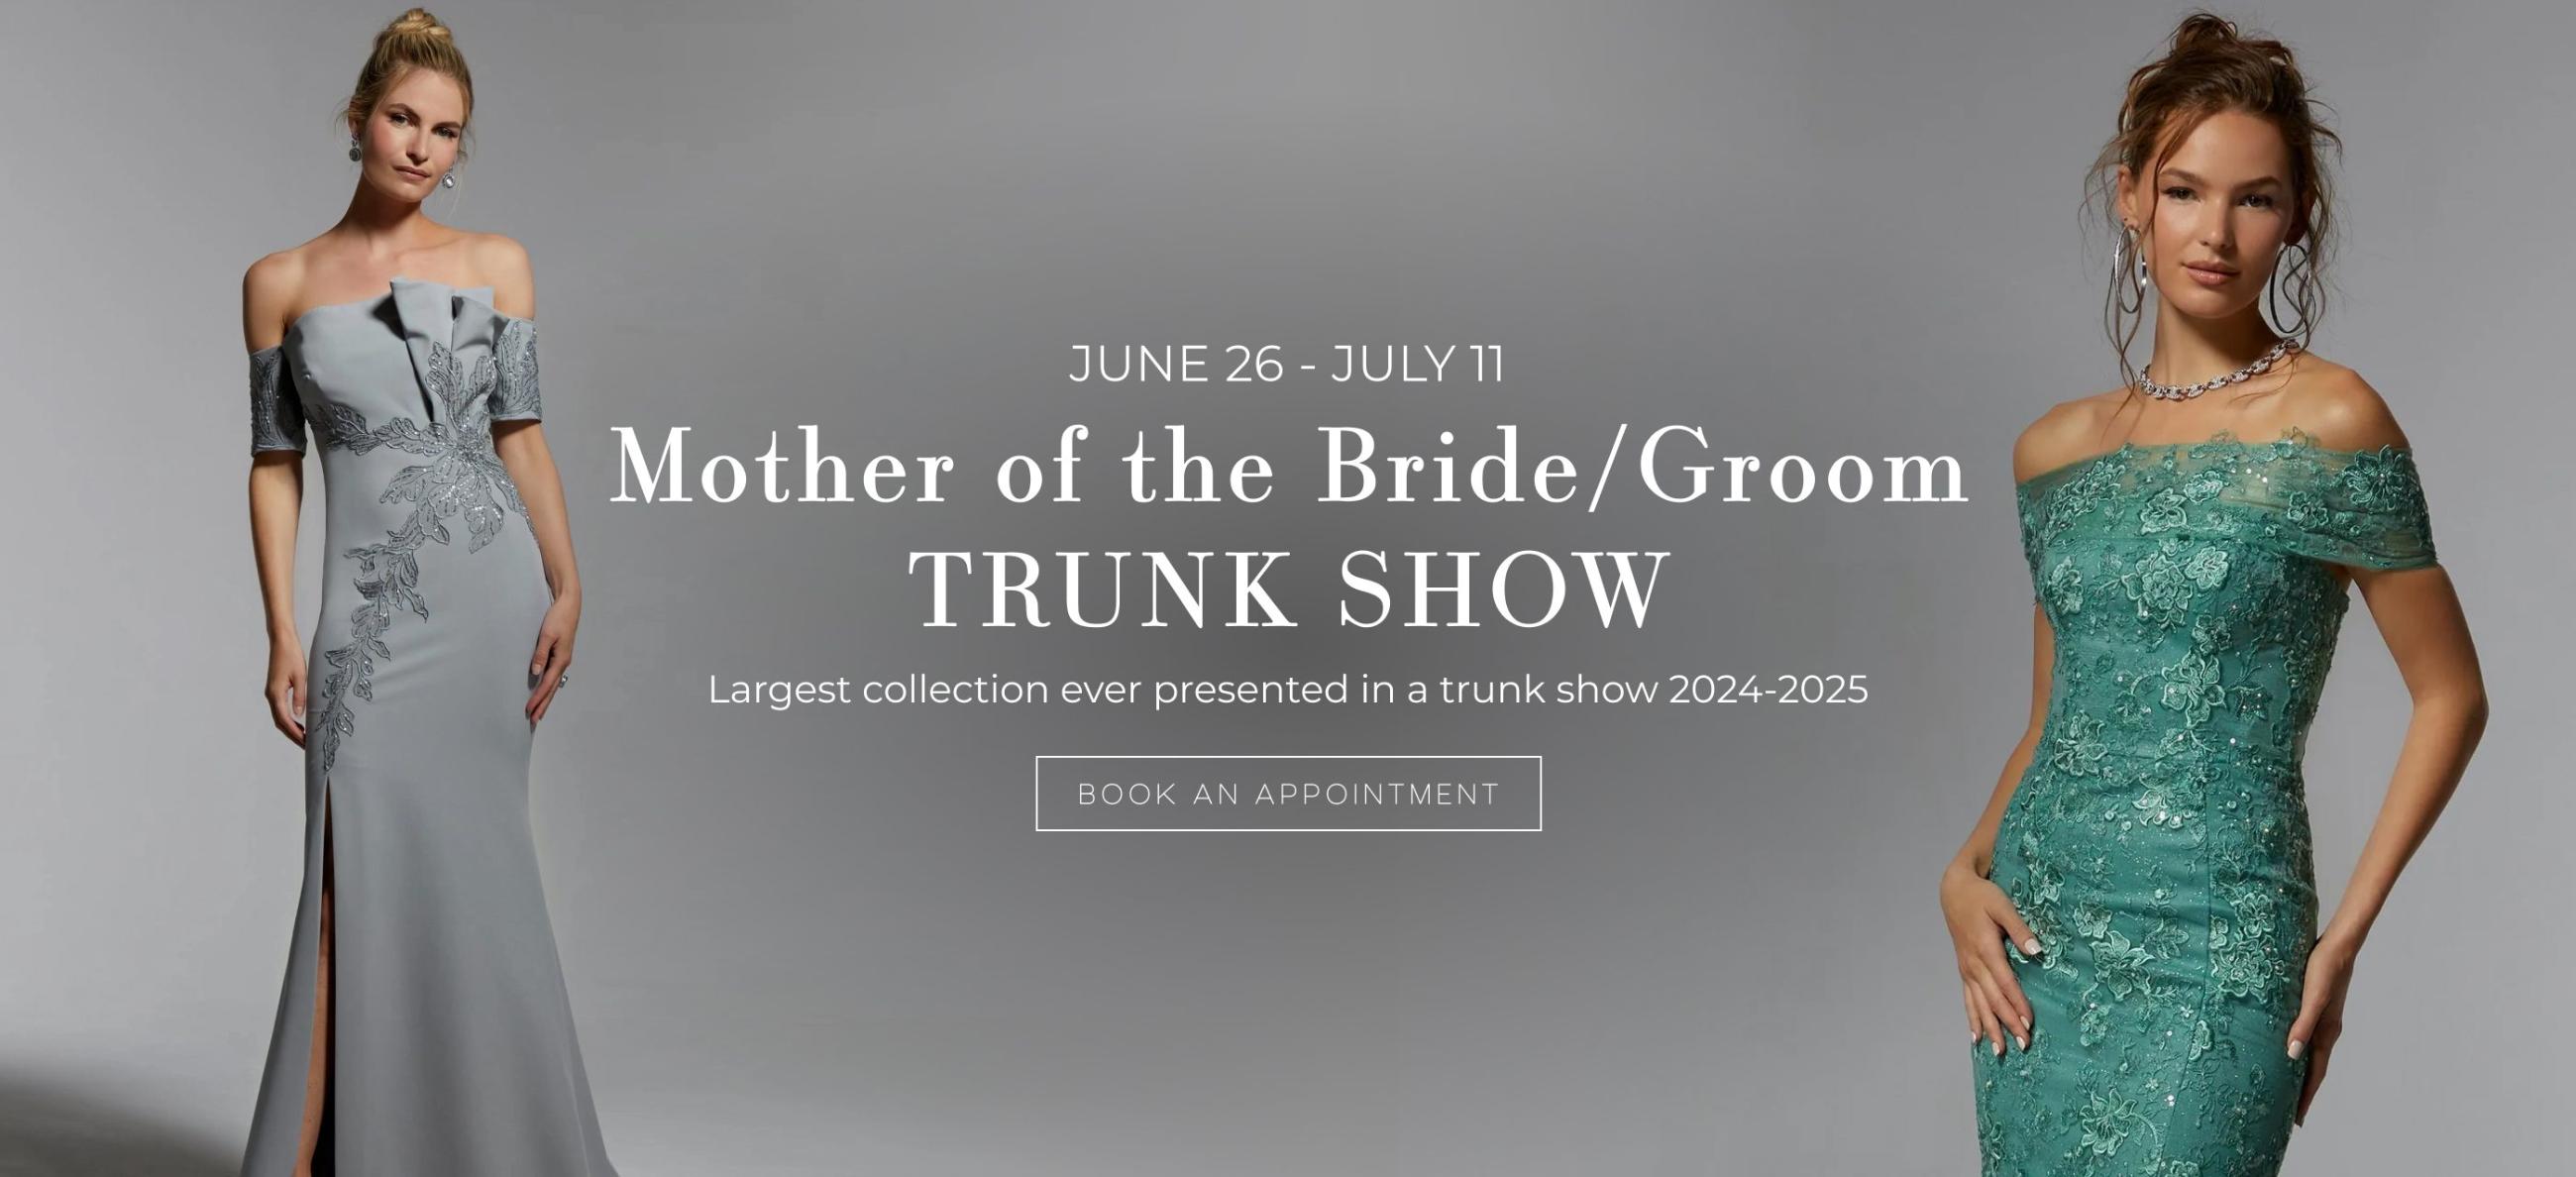 mother of the bride trunk show june - july 2024 banner